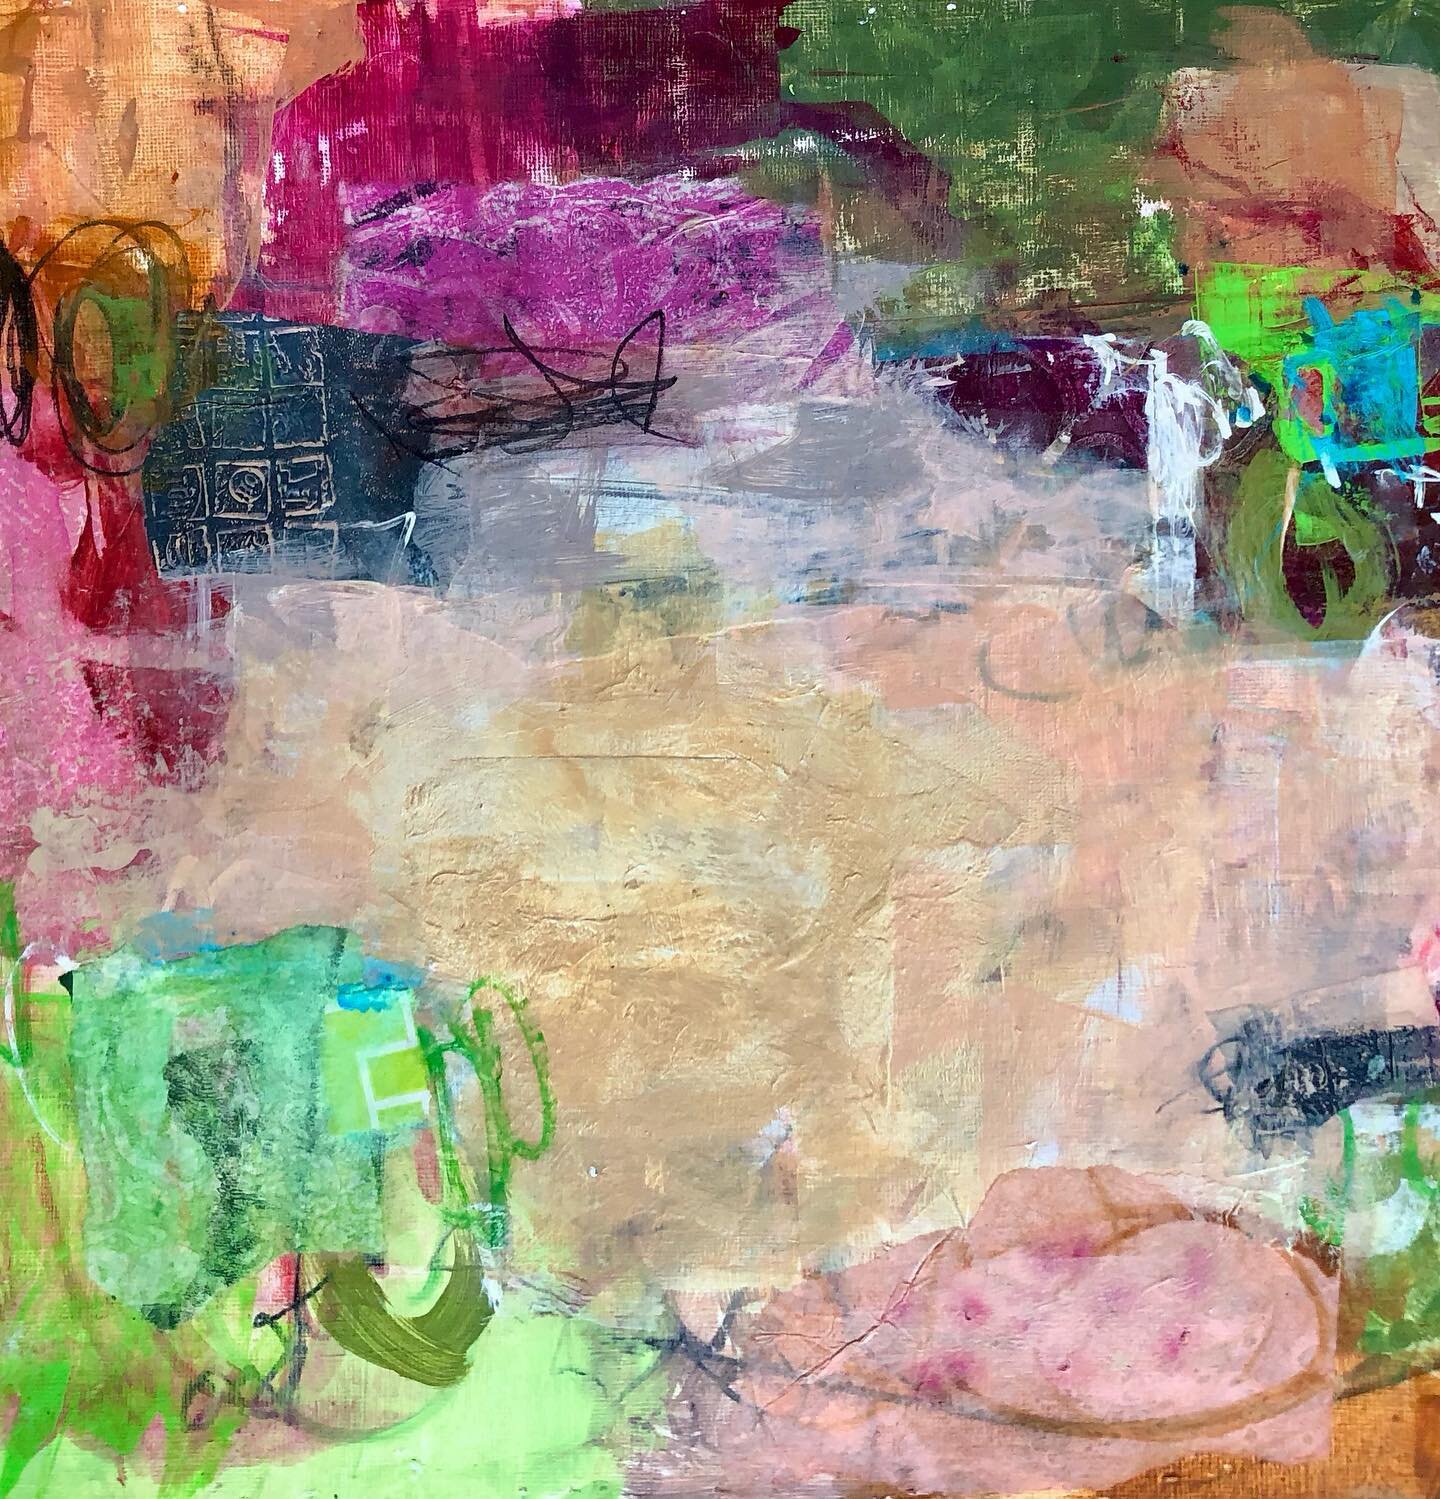 Working out of my comfort level&hellip;. choosing a color scheme that is not my &ldquo;go to&rdquo;. Still working through the challenge.
#abstractpaintingartist #collageandpainting #markmakingart #studioplay #playingwithcolors #mixedmediapaintings #